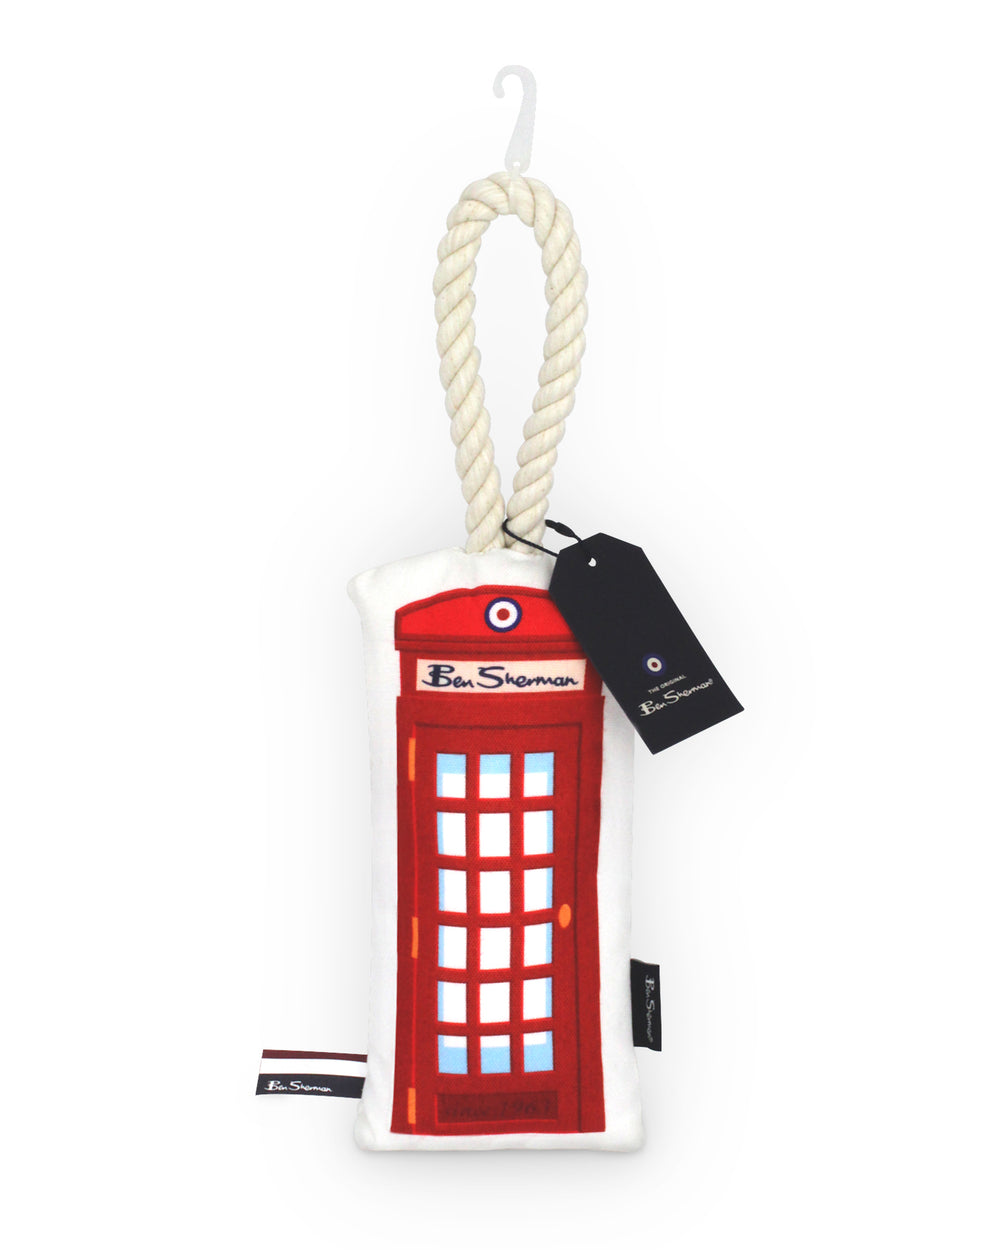 Phonebooth Canvas Tugger Pet Toy - Cream